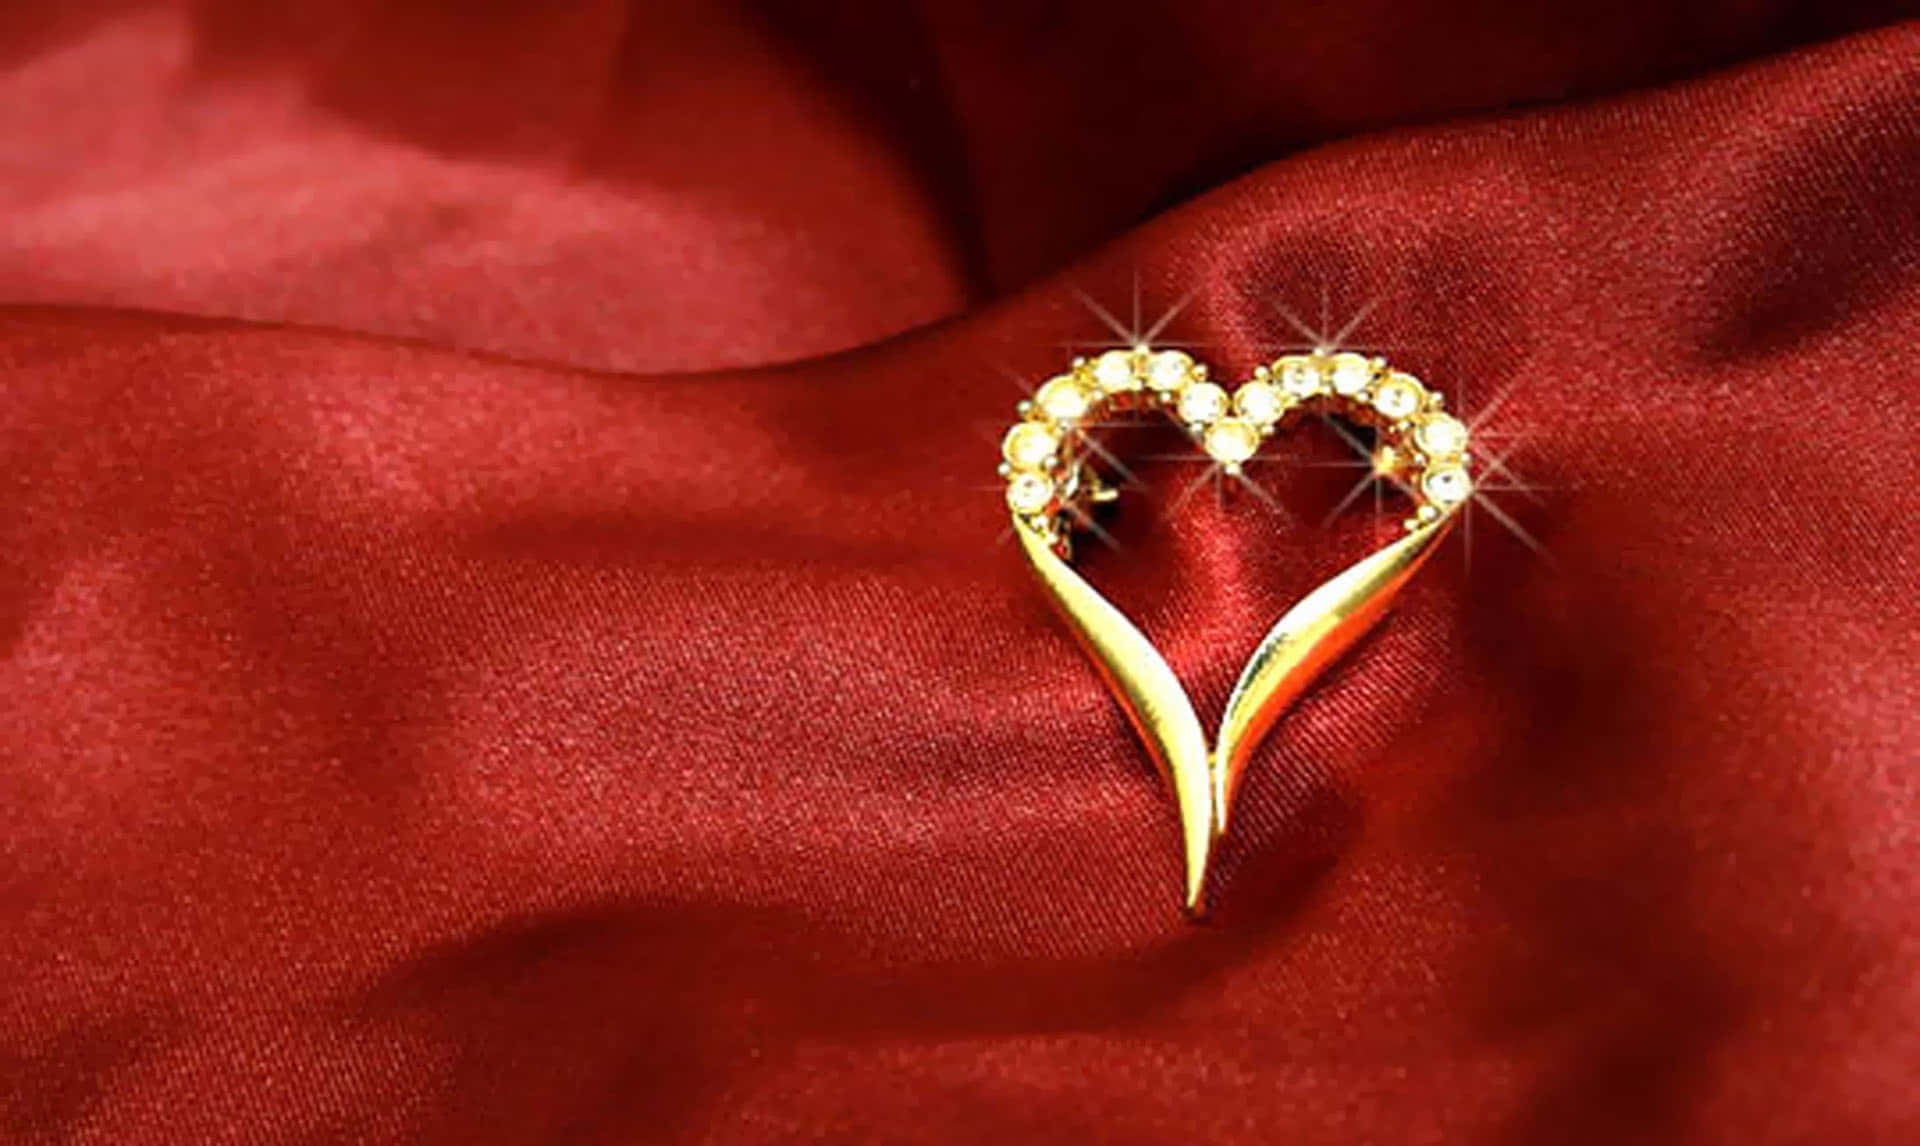 A Gold Heart Shaped Brooch On A Red Cloth